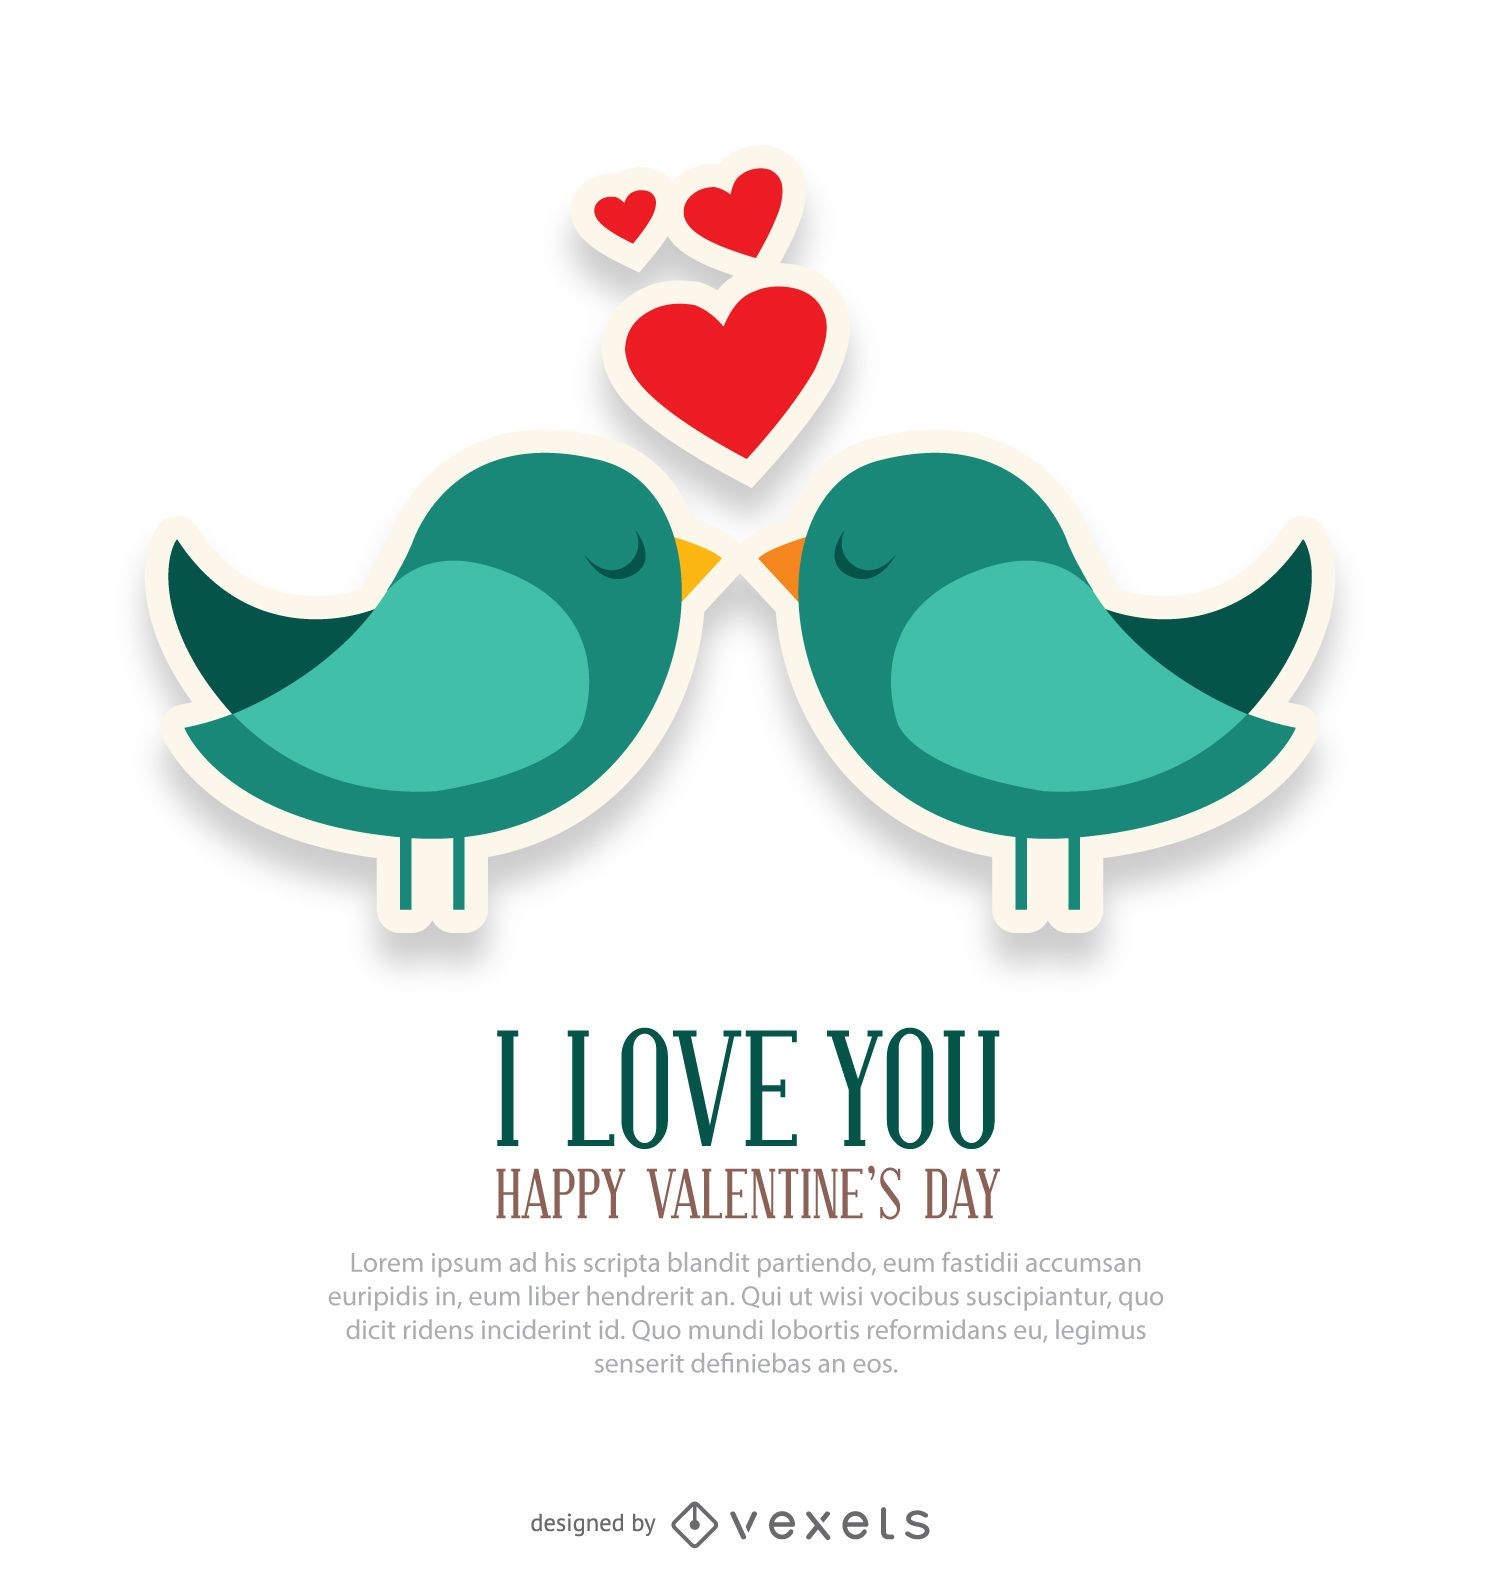 I love you and birds card - Vector download